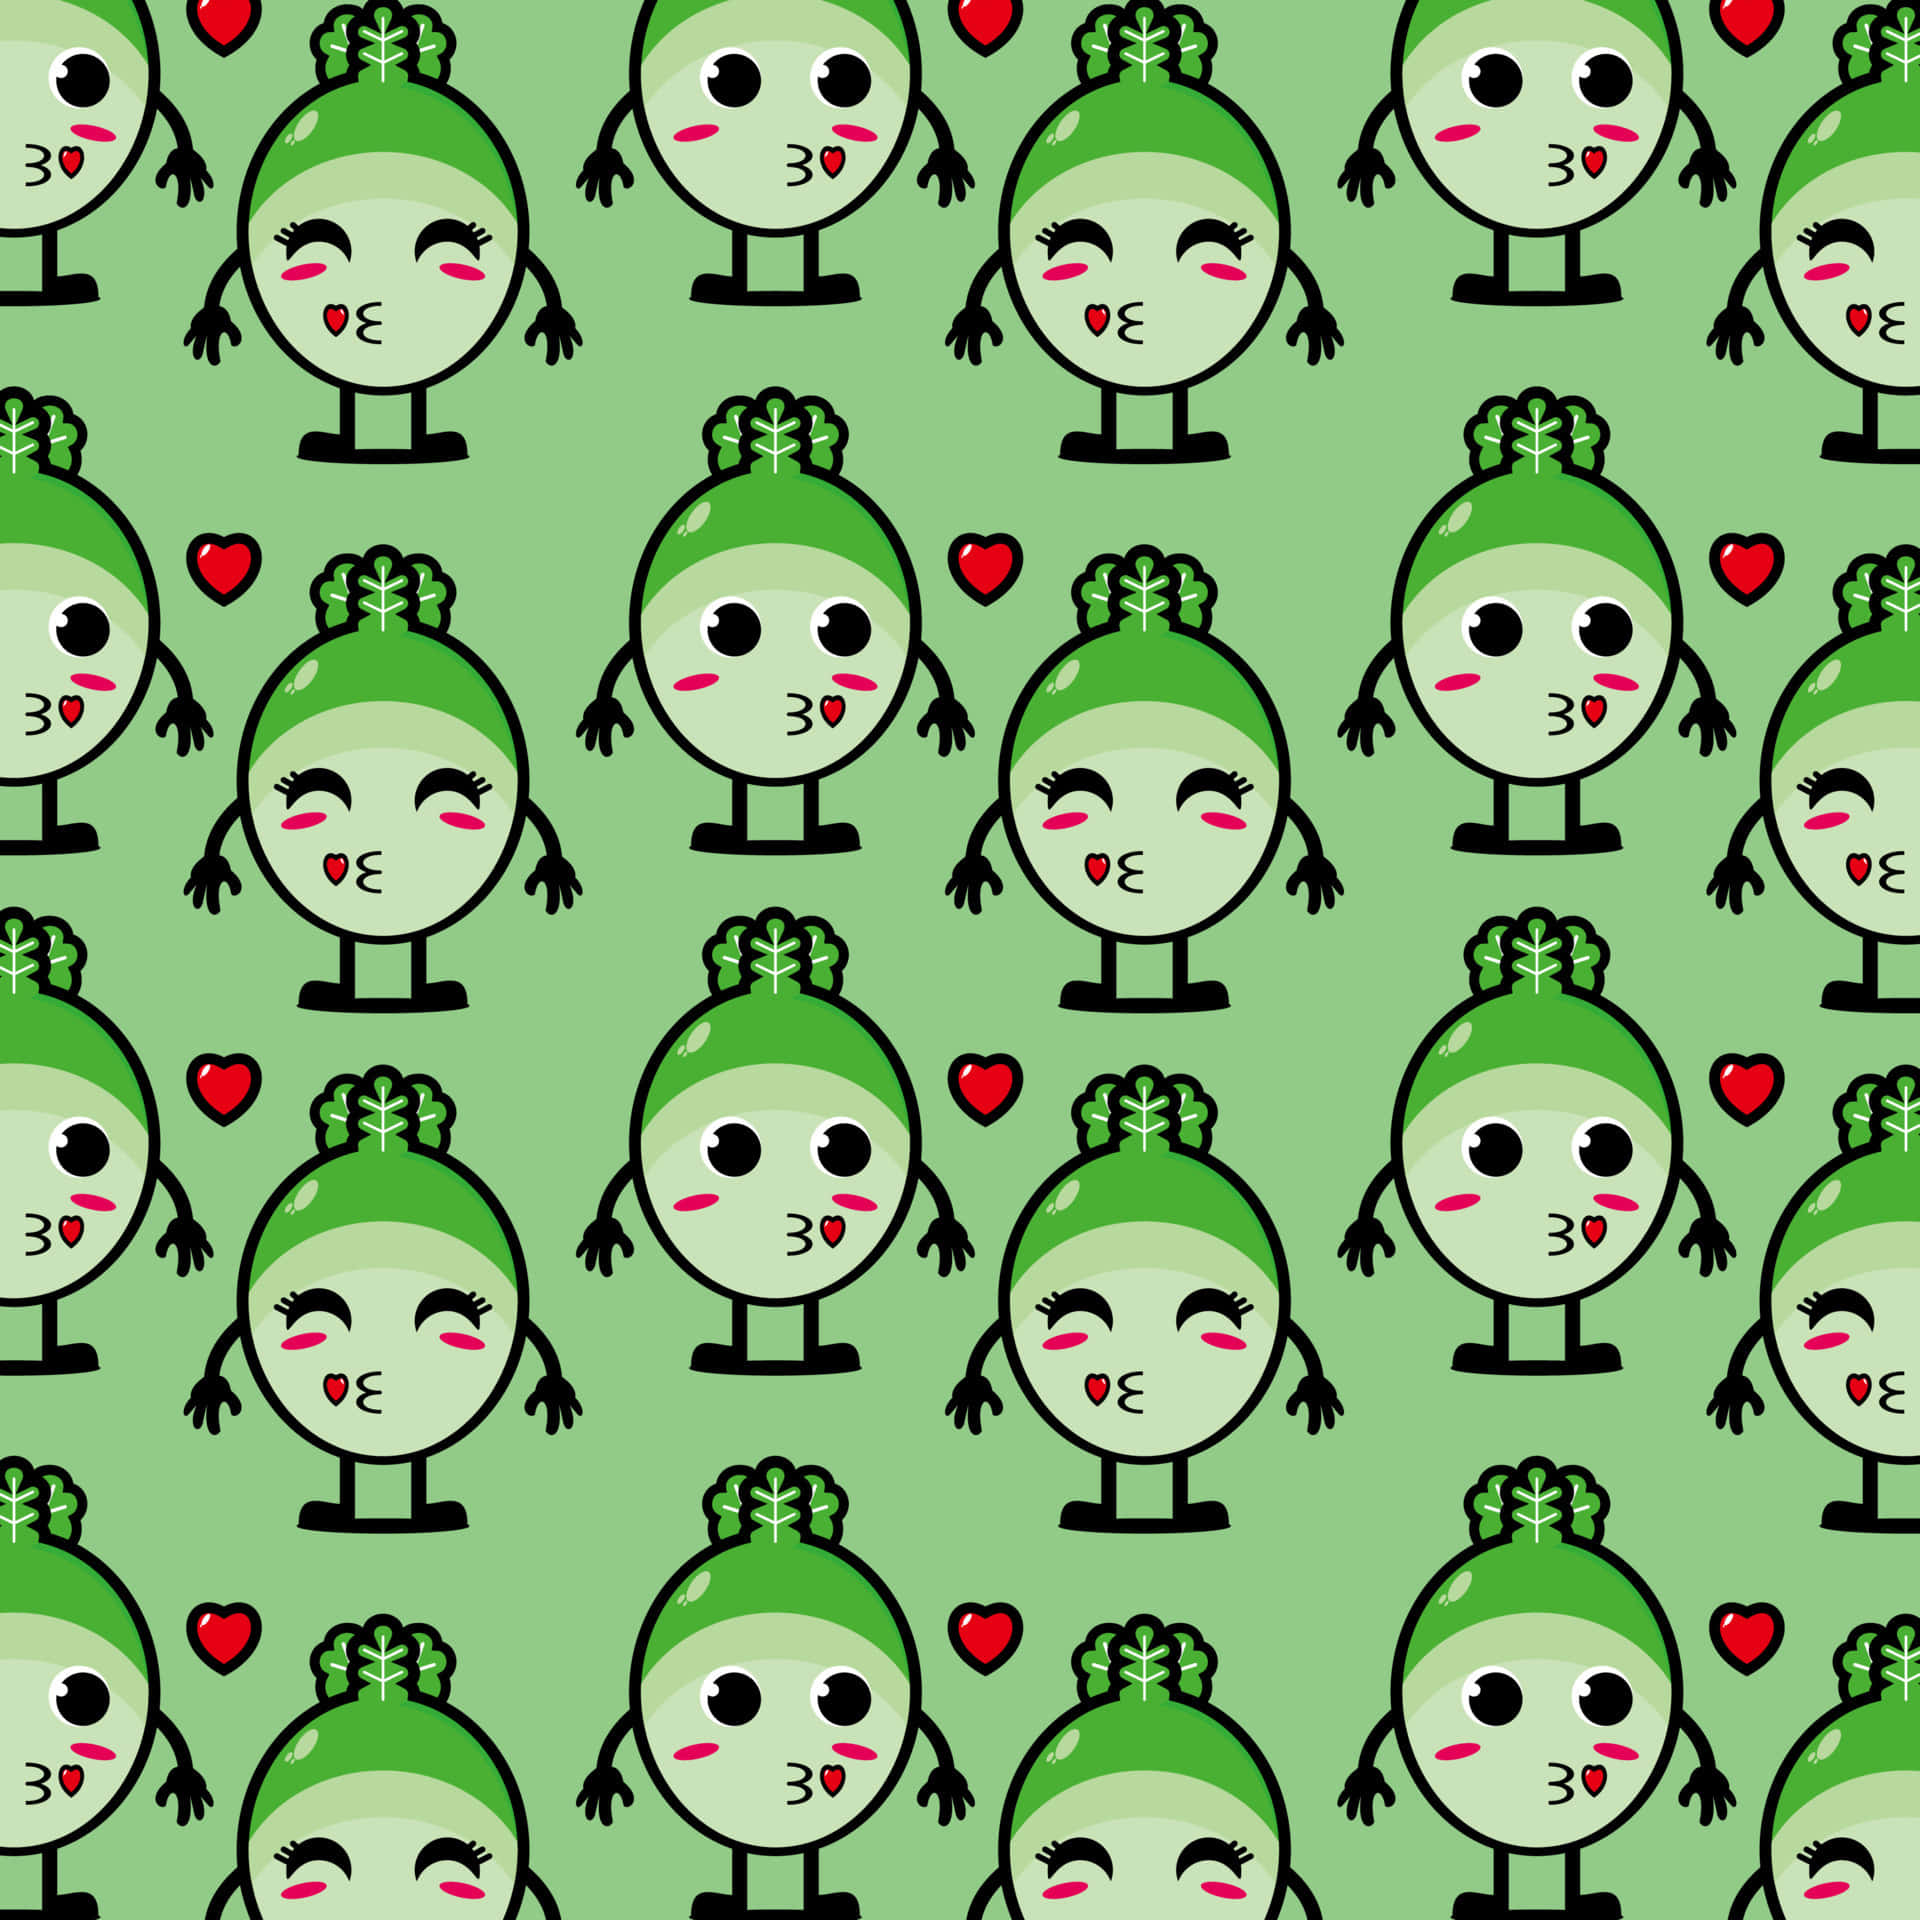 Adorable Kawaii Characters on Colorful Background Wallpaper